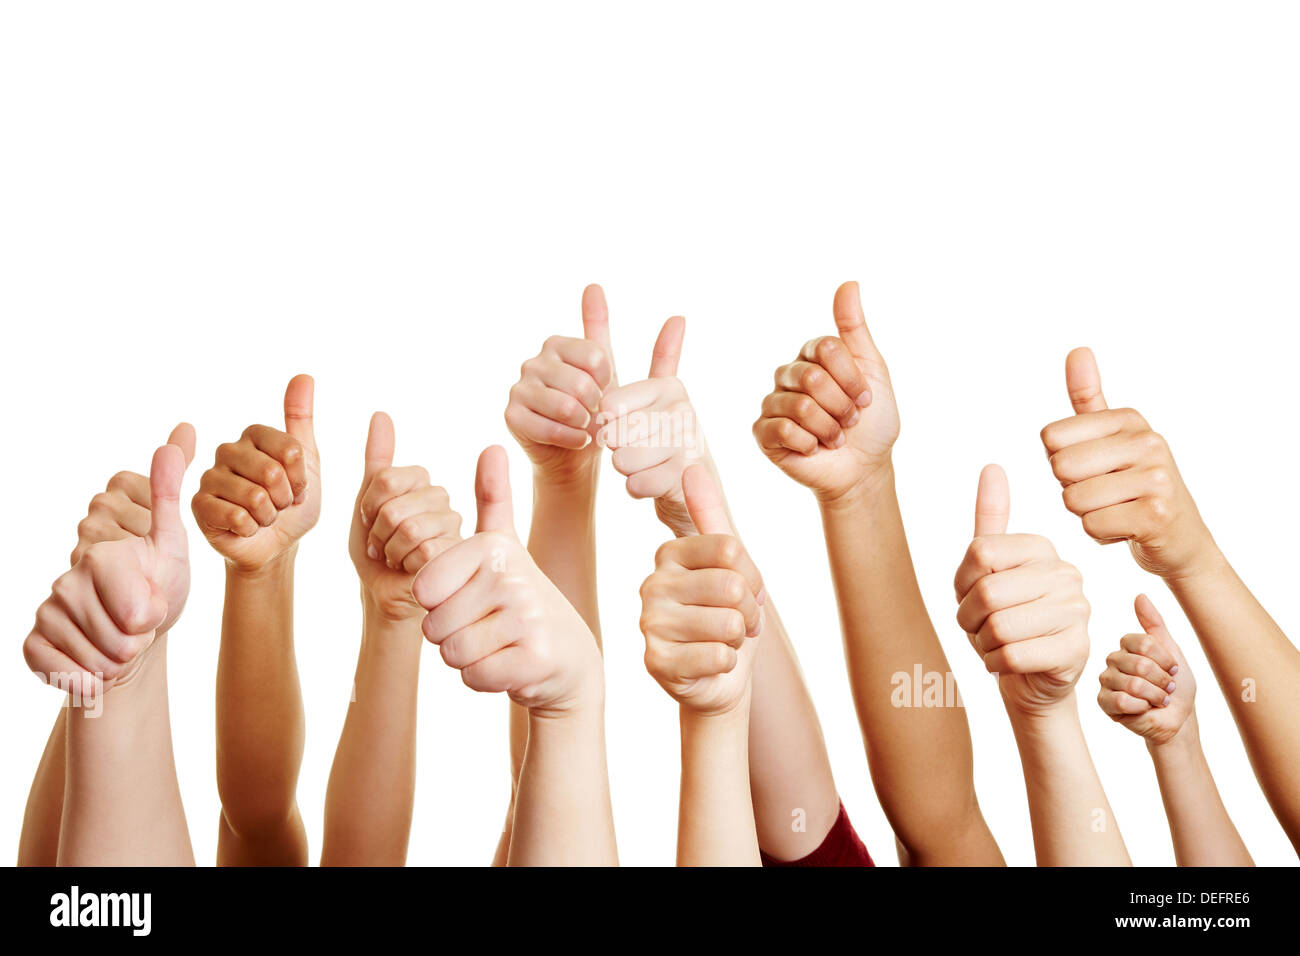 Many people congratulate a winner and holding their thumbs up Stock Photo